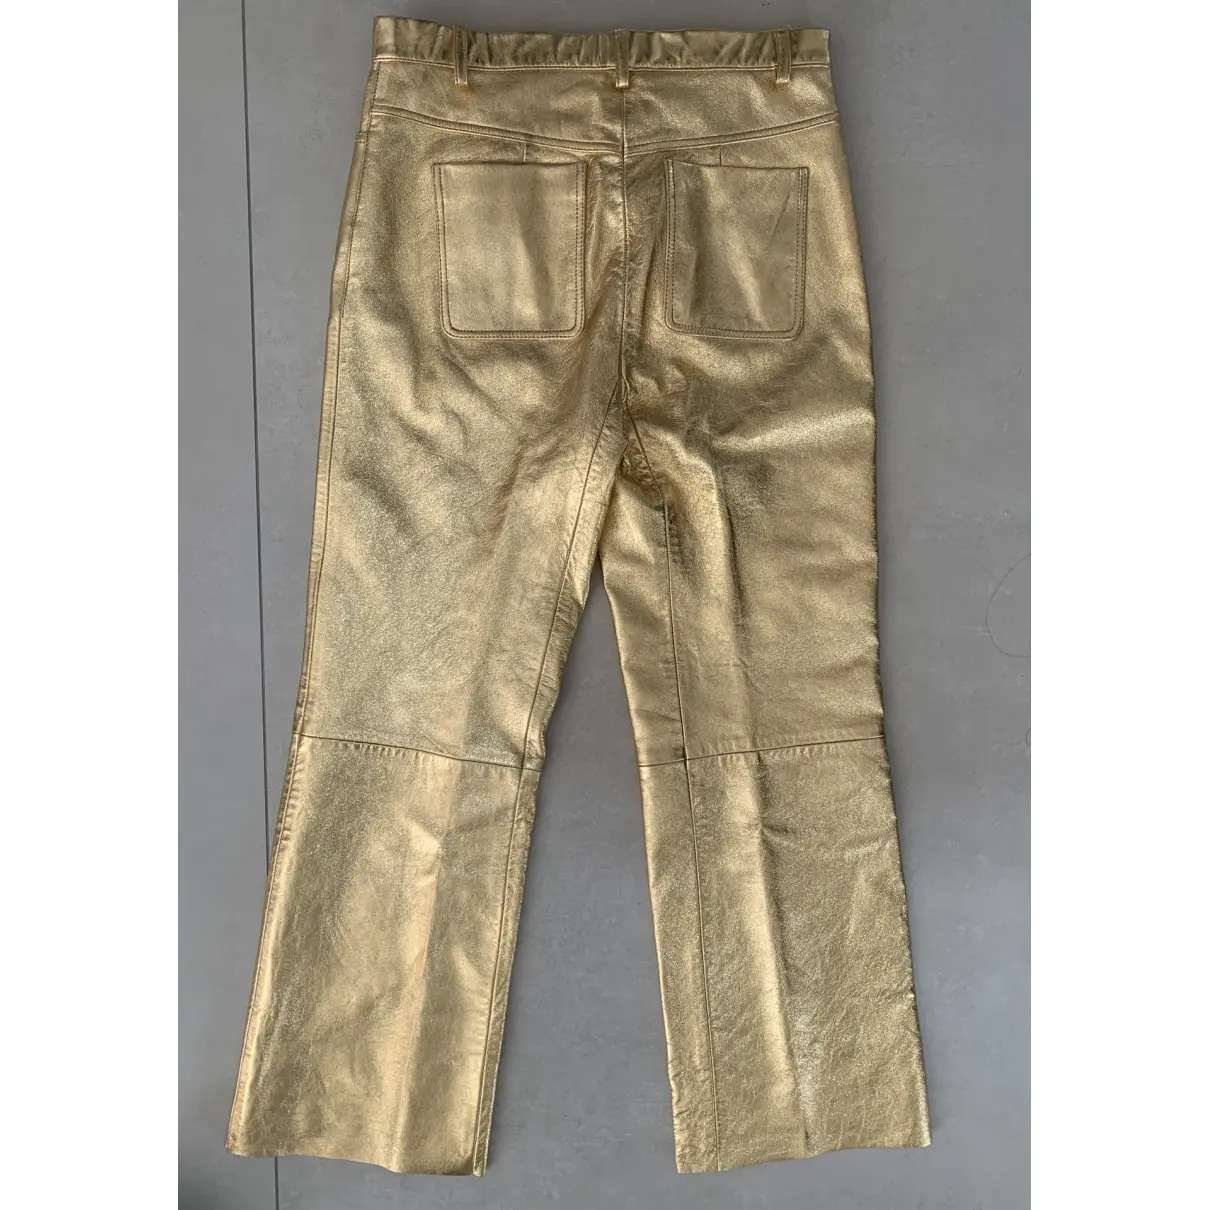 Buy Sandro Spring Summer 2020 leather trousers online